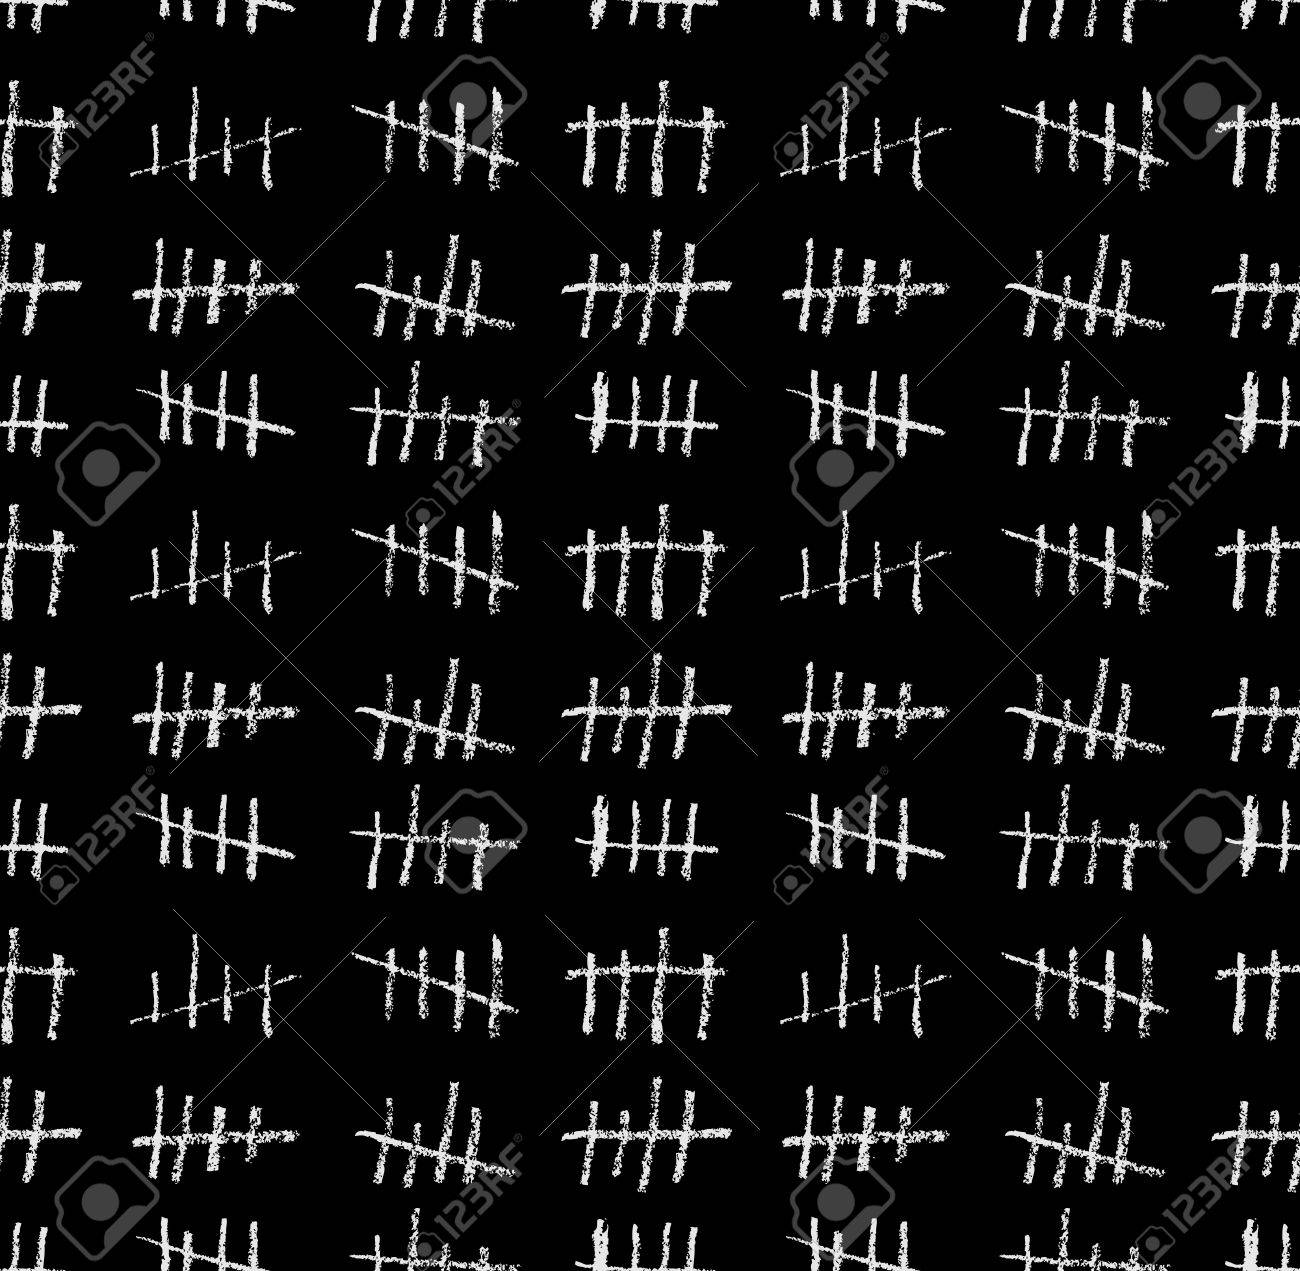 Tally Marks Day Counting Seamless Pattern Background With